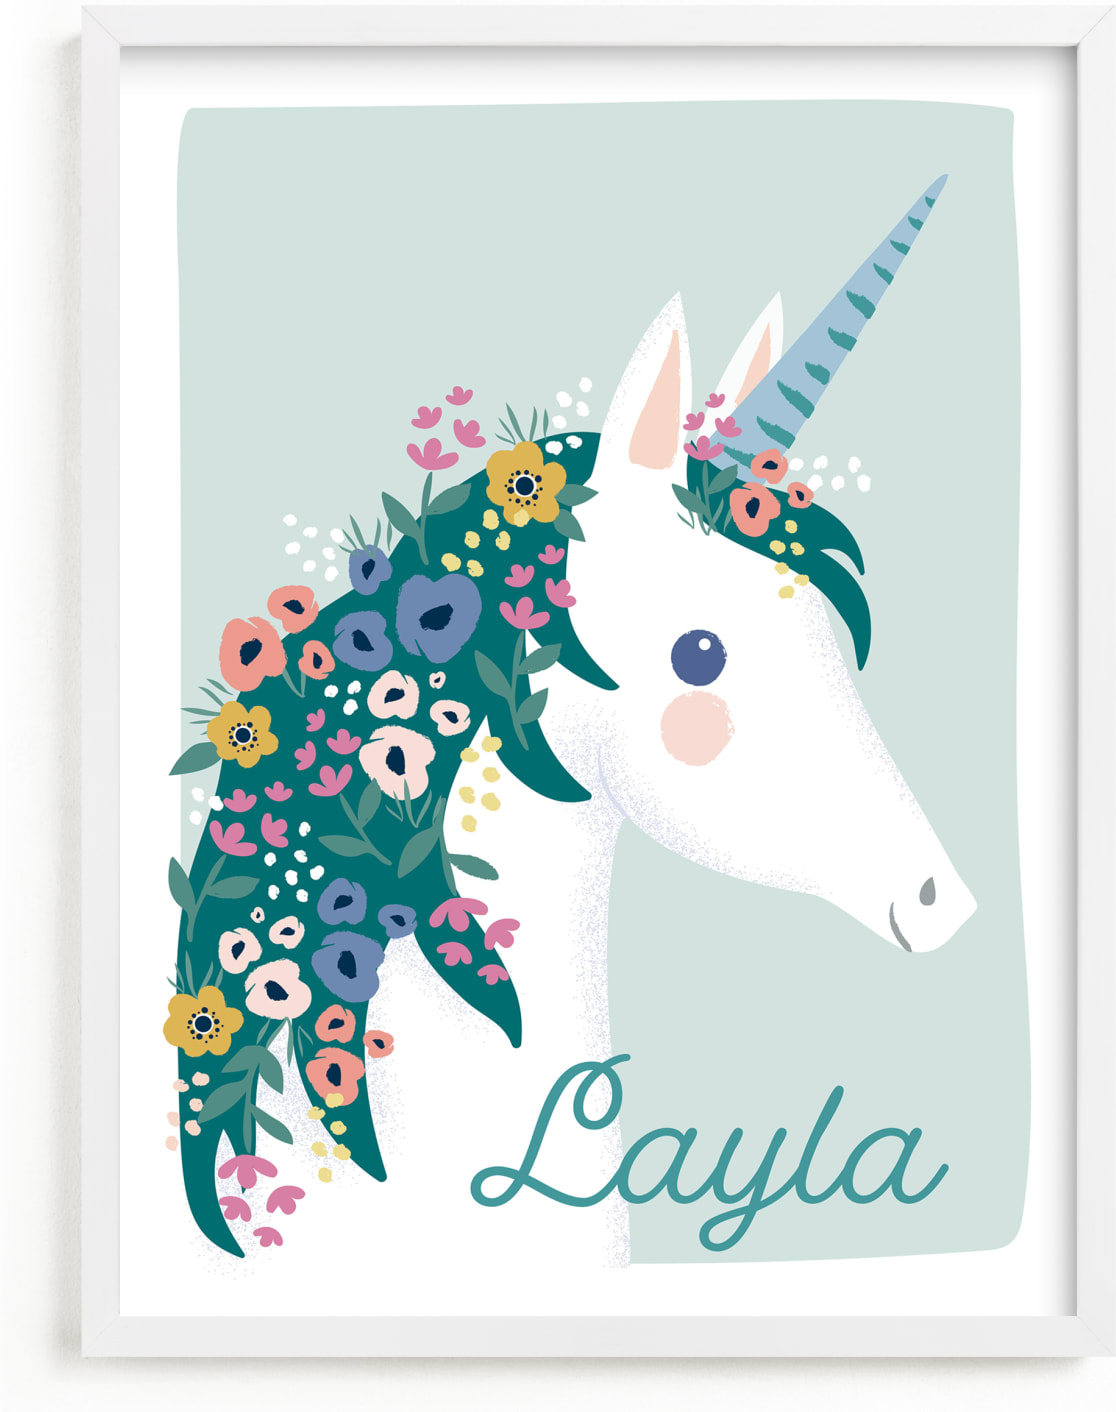 This is a colorful personalized art for kid by Karidy Walker called garden unicorn.